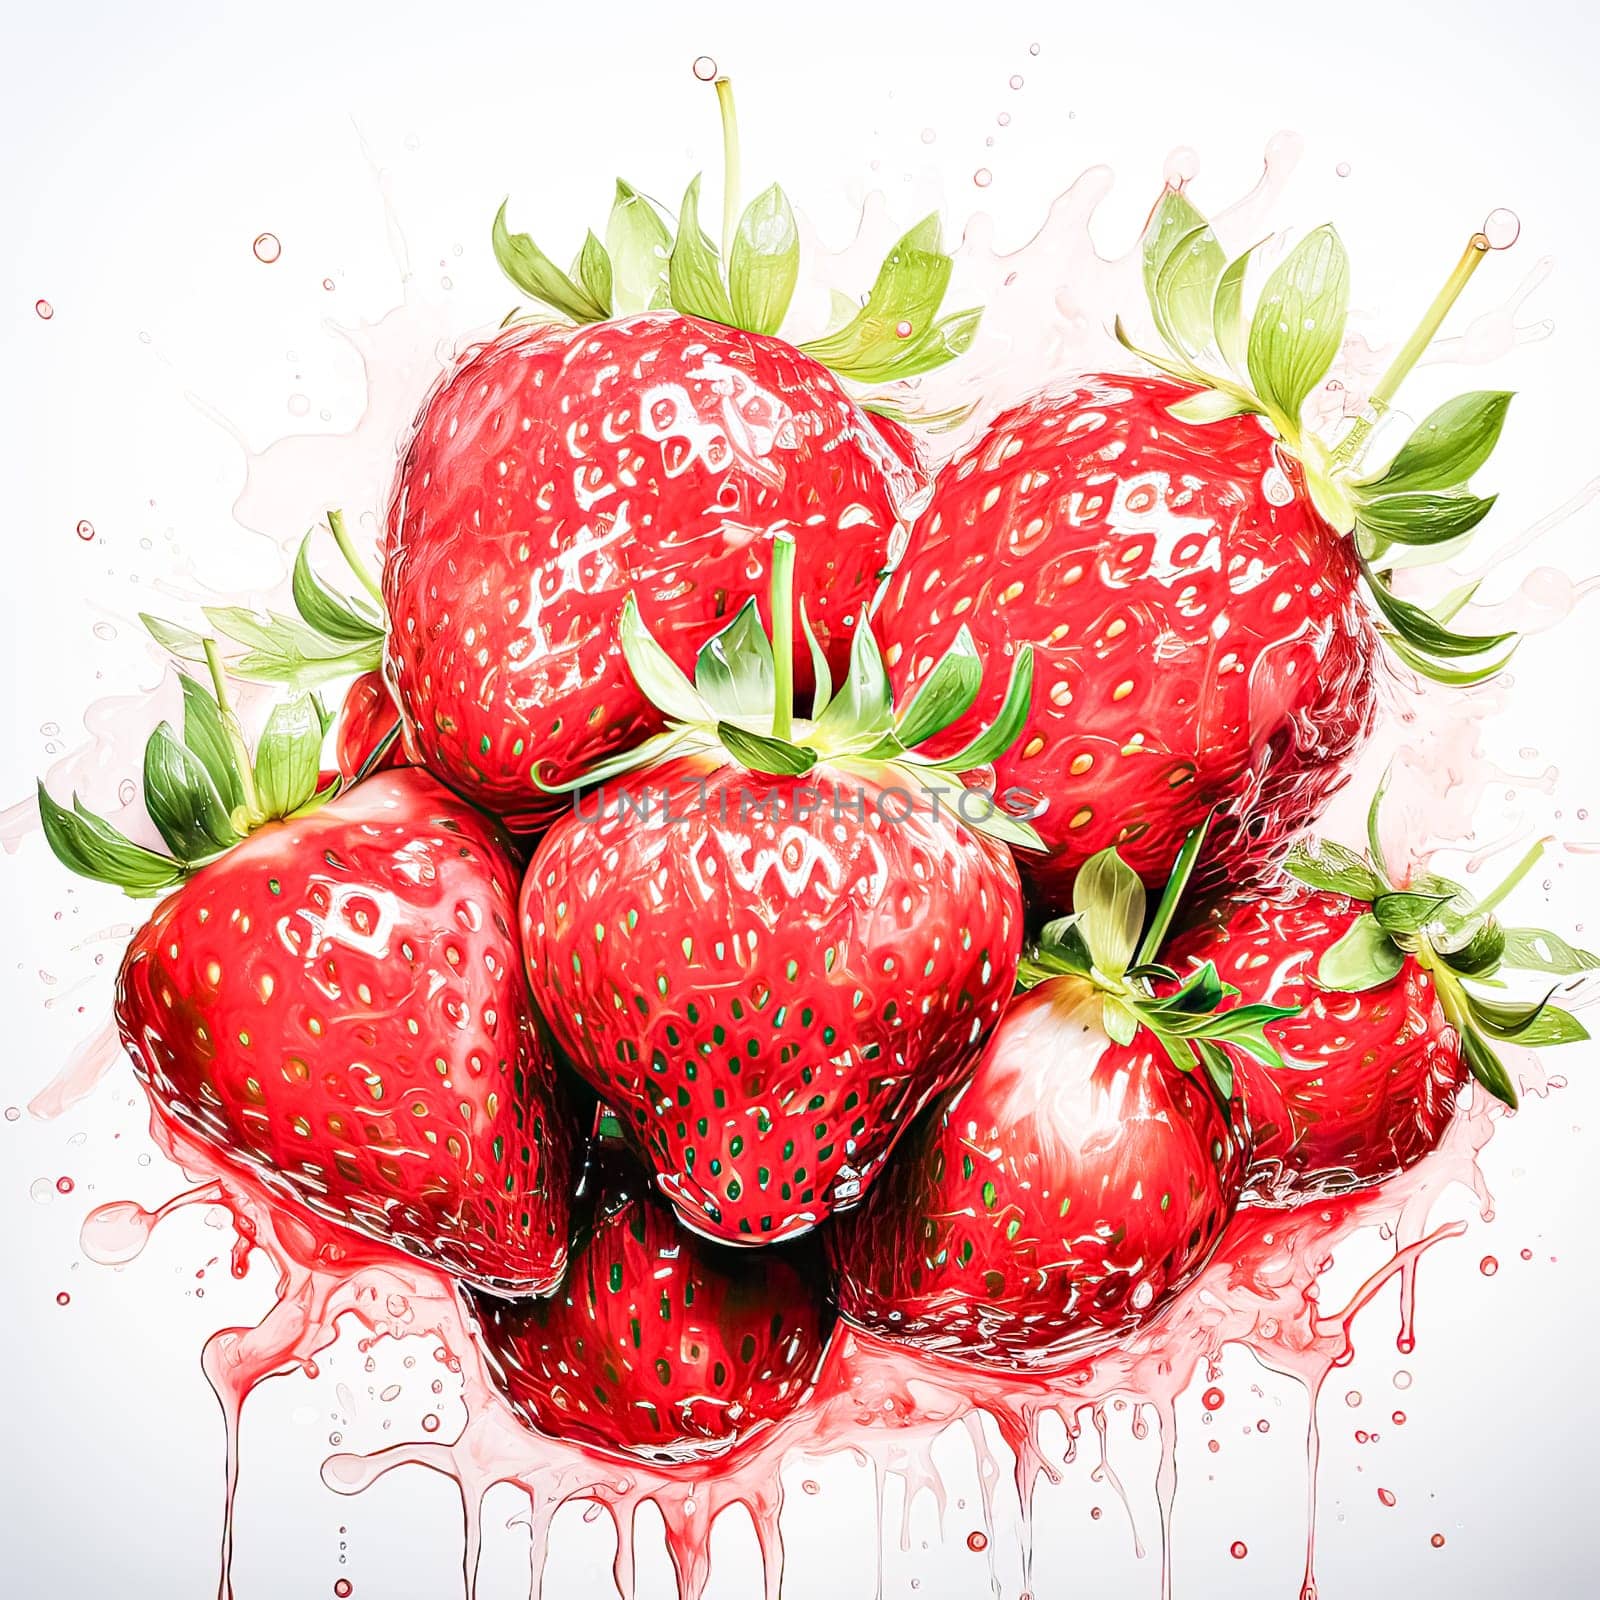 Delicate allure, Ripe strawberries depicted in watercolor, bringing a vibrant burst of freshness to a serene white background.